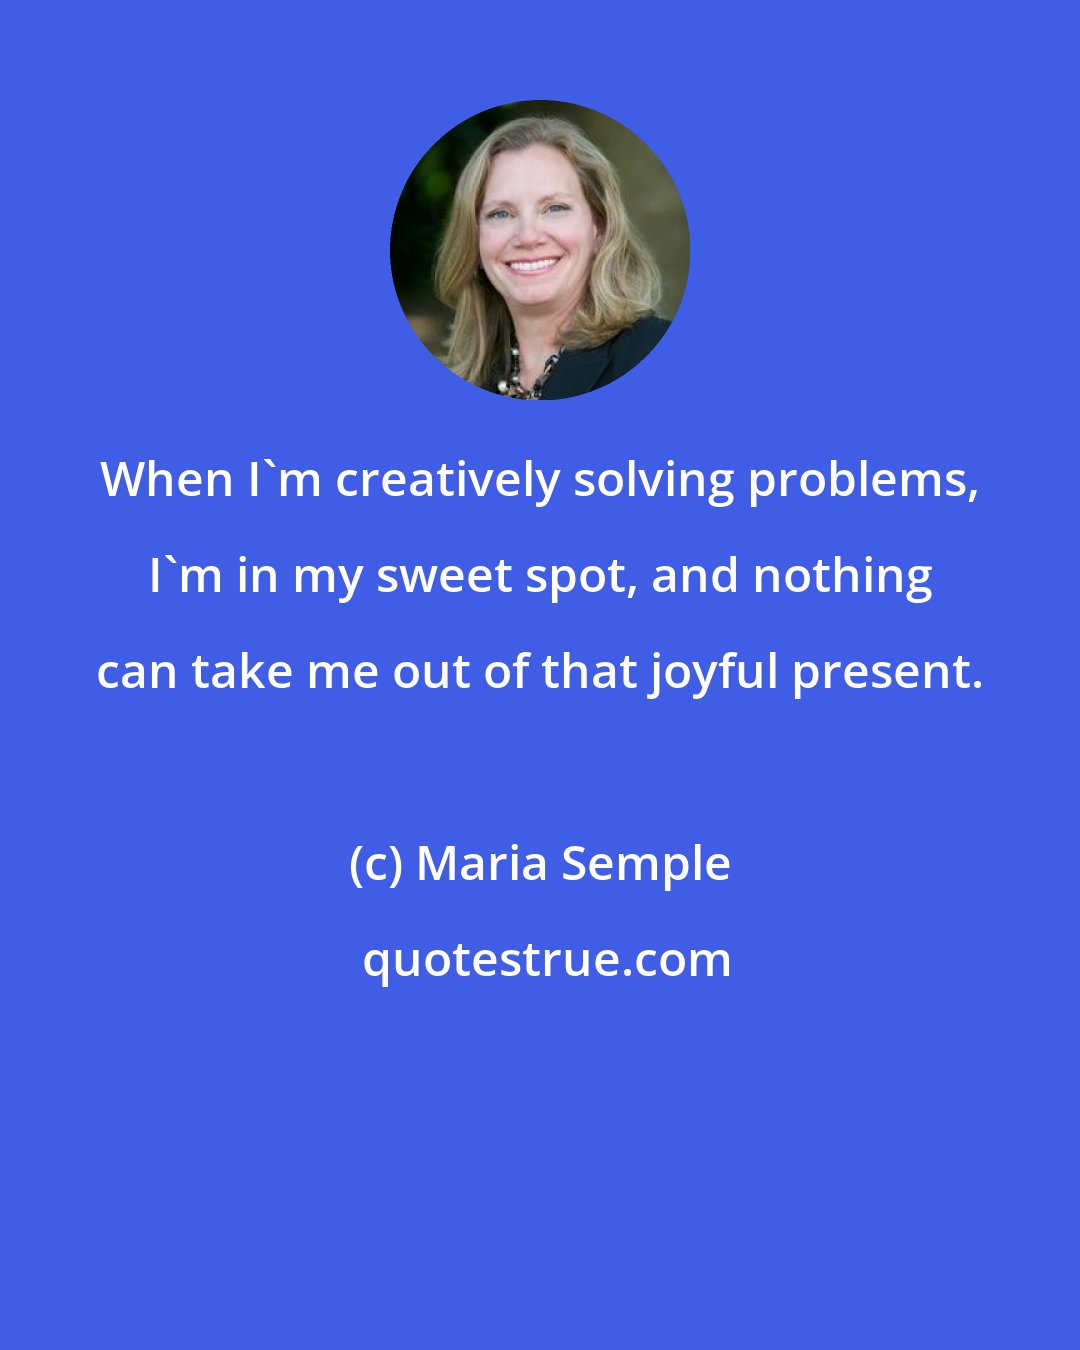 Maria Semple: When I'm creatively solving problems, I'm in my sweet spot, and nothing can take me out of that joyful present.